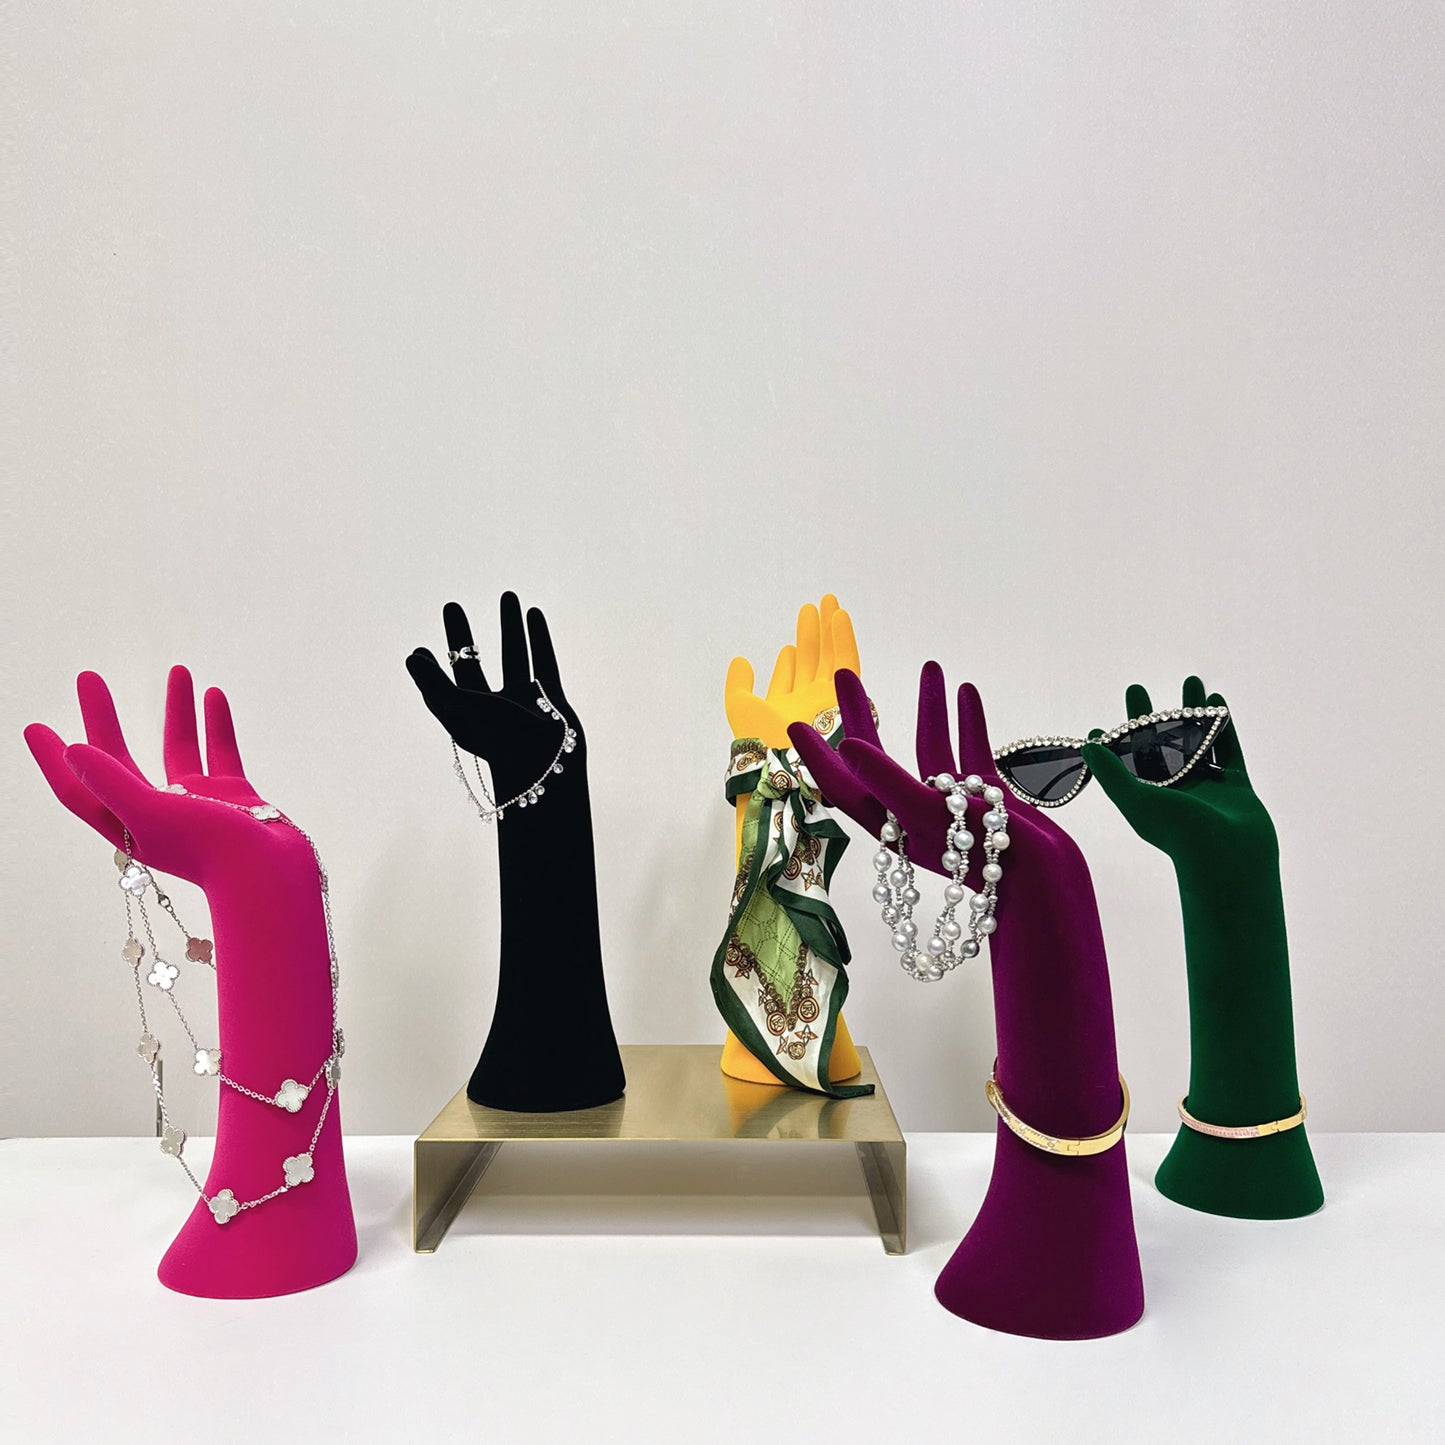 Jelimate High End Left Female Mannequin Hand Stand,Colorful Velvet Dress Form Ring Display Hand Model Props,Sunglasses Jewelry Display Mannequin Hand